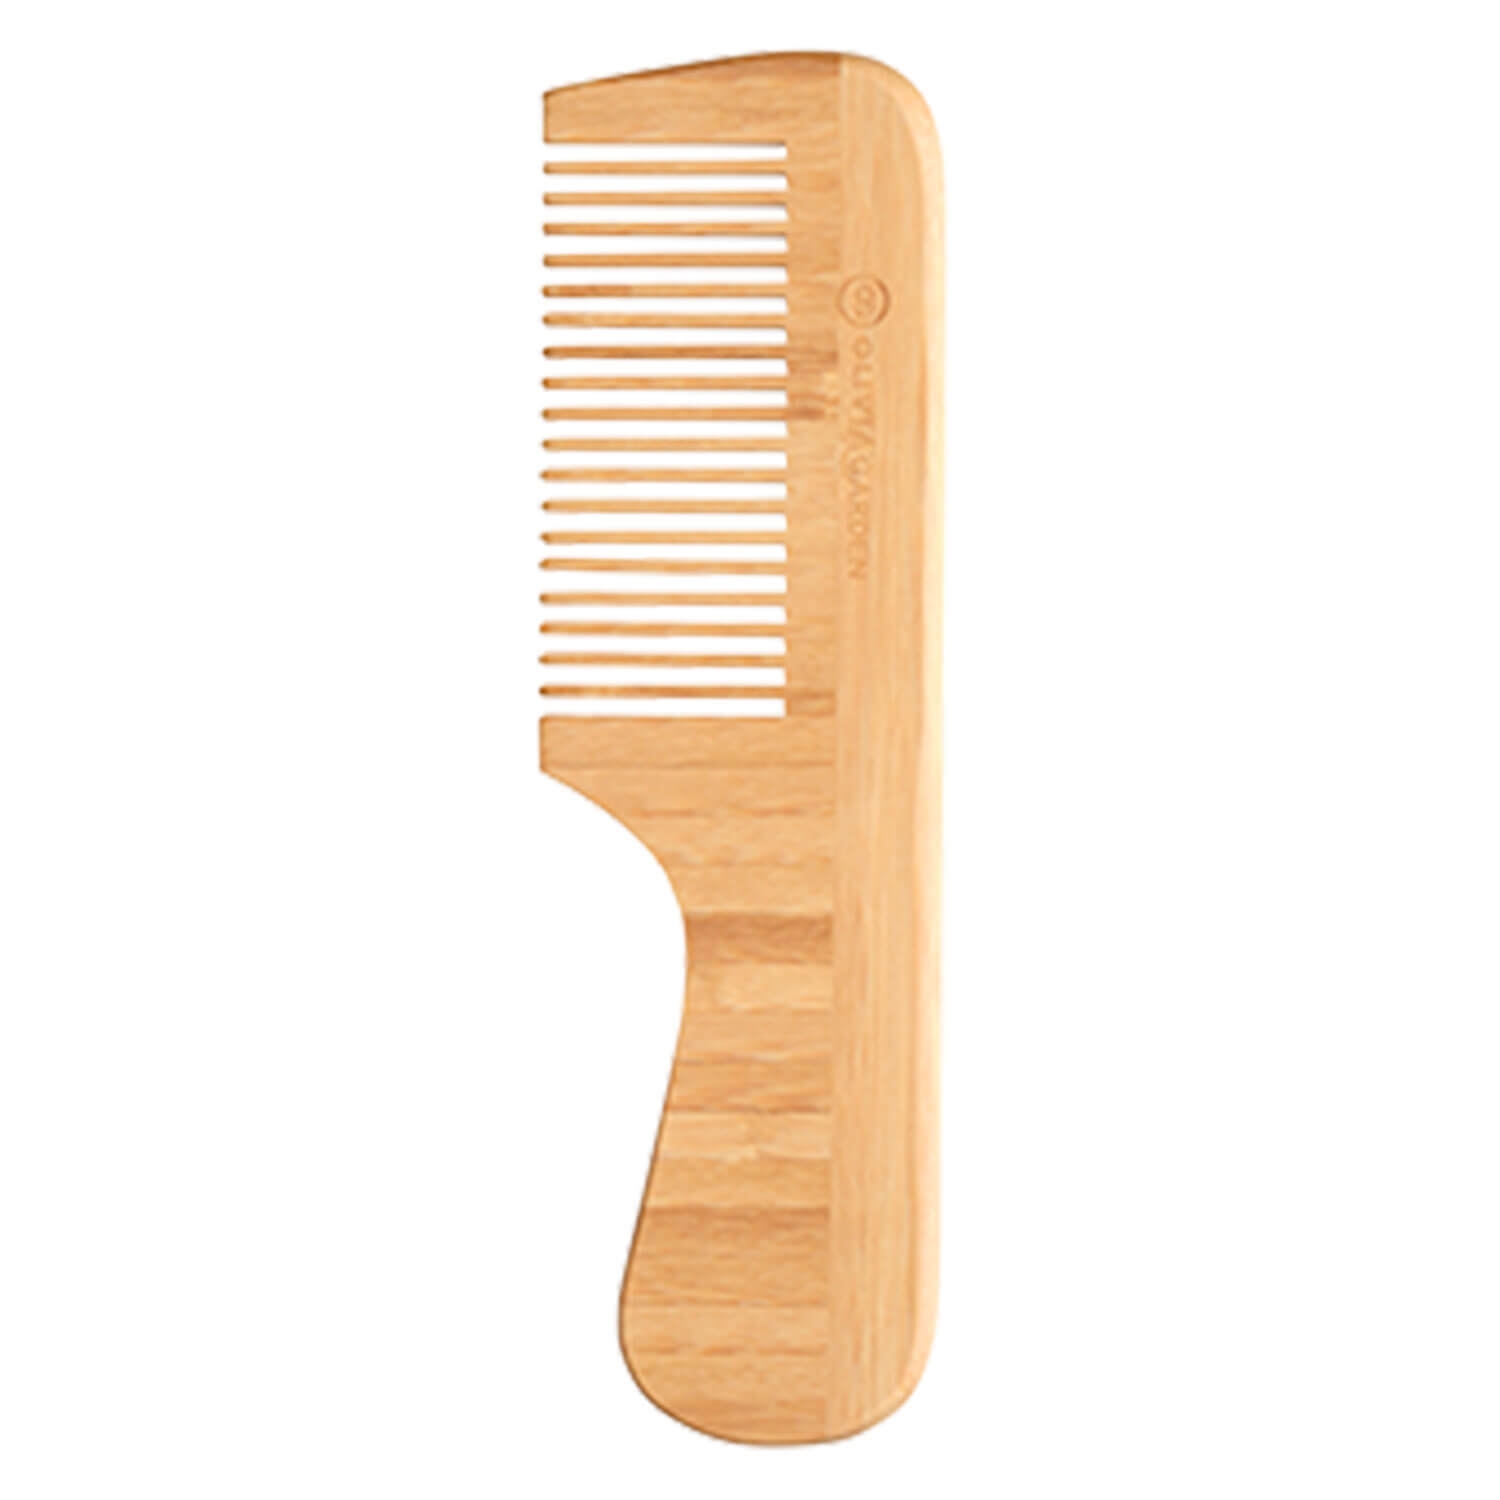 Product image from OG Bamboo Touch - Griffkamm Weite Zahnung